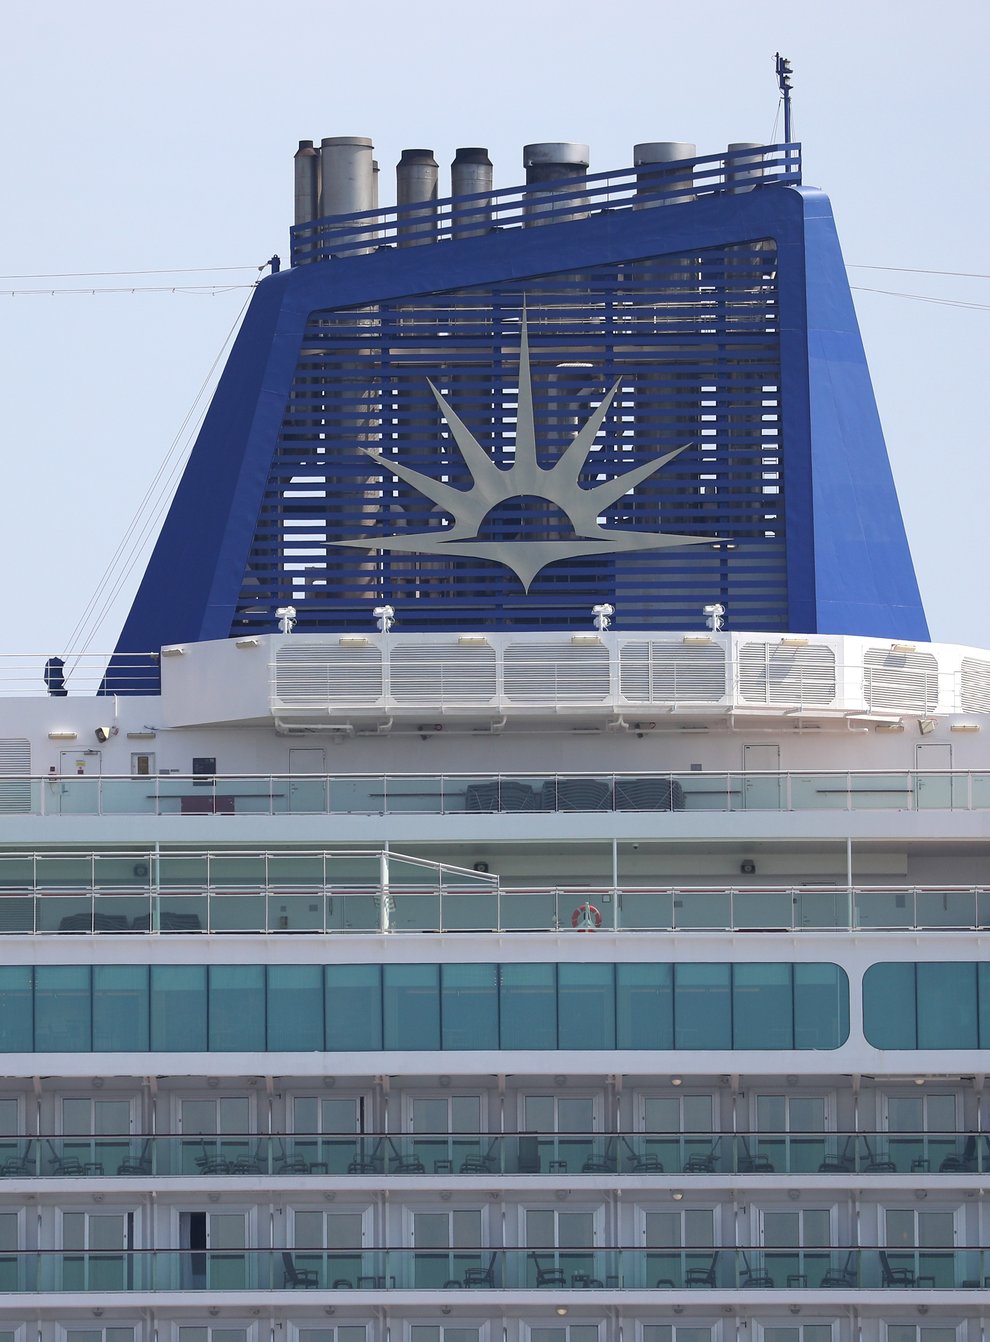 P&O Cruises has extended the suspension of sailings until at least mid-November 